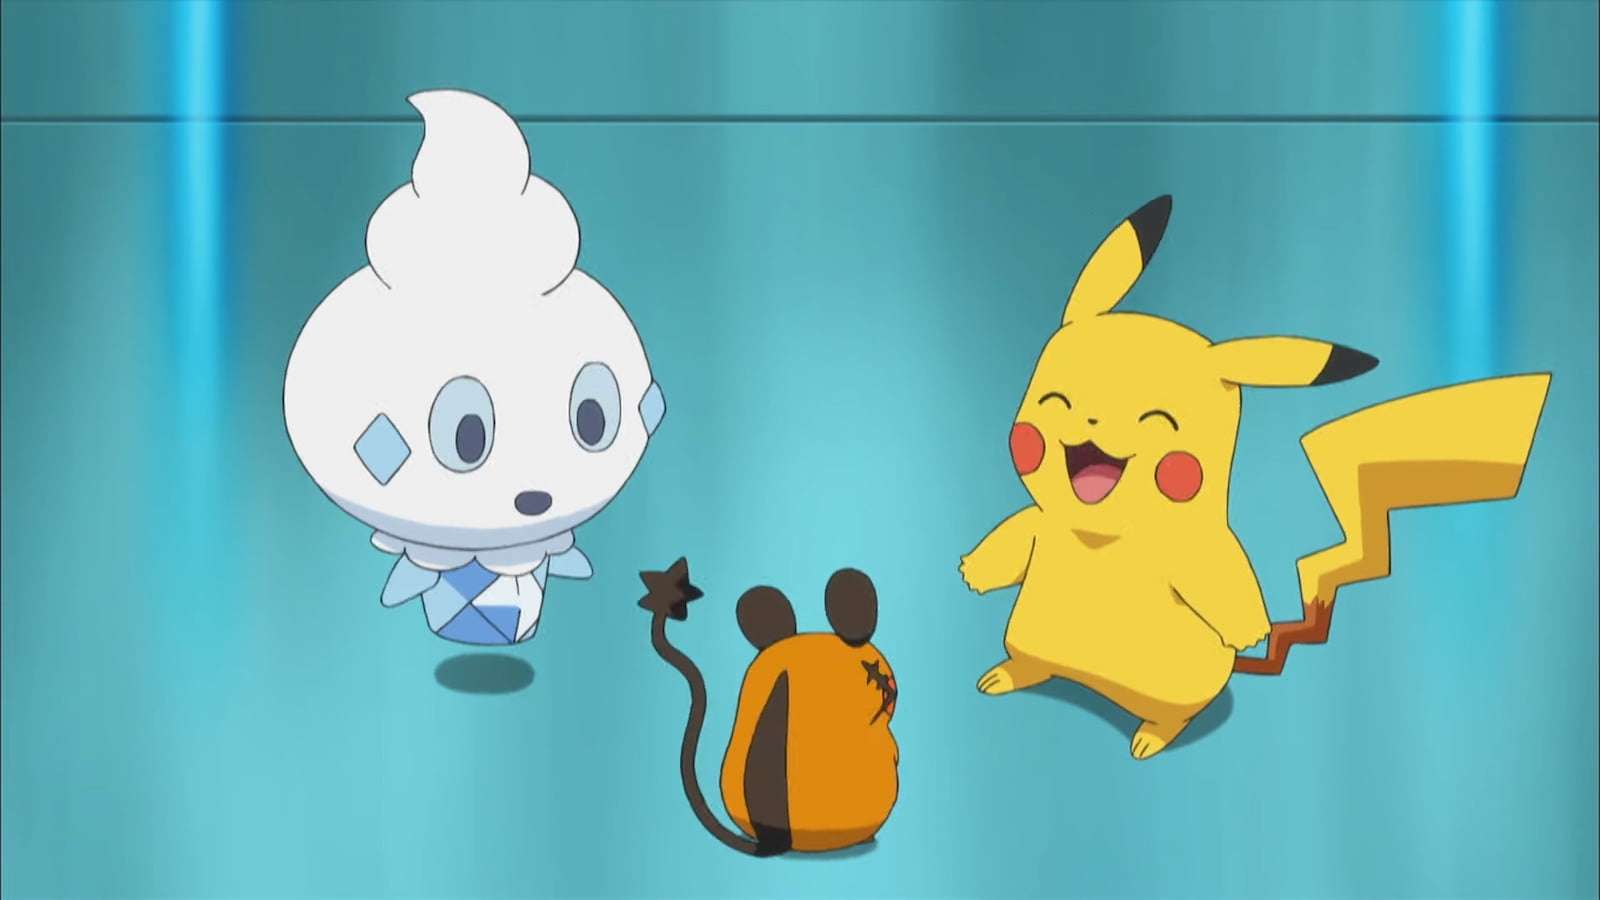 Vanillite and Pikachu with Dedenne in the Pokemon anime